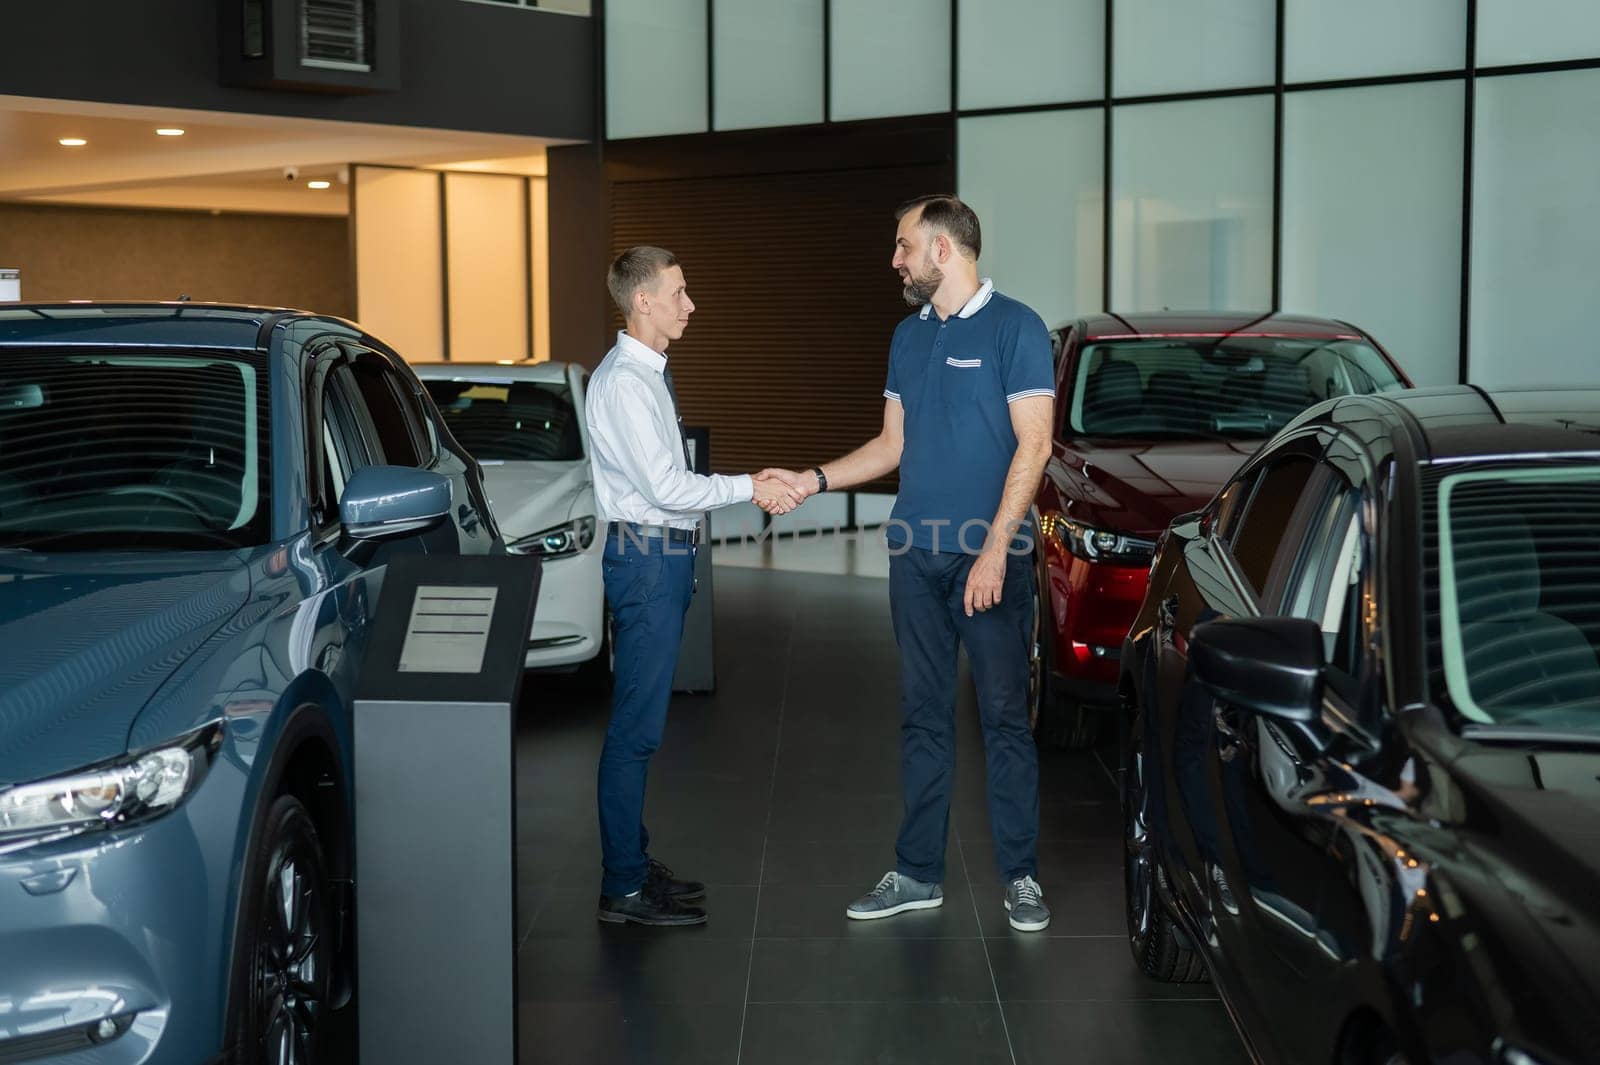 Seller and buyer shake hands in a car dealership. Caucasian man buys a car